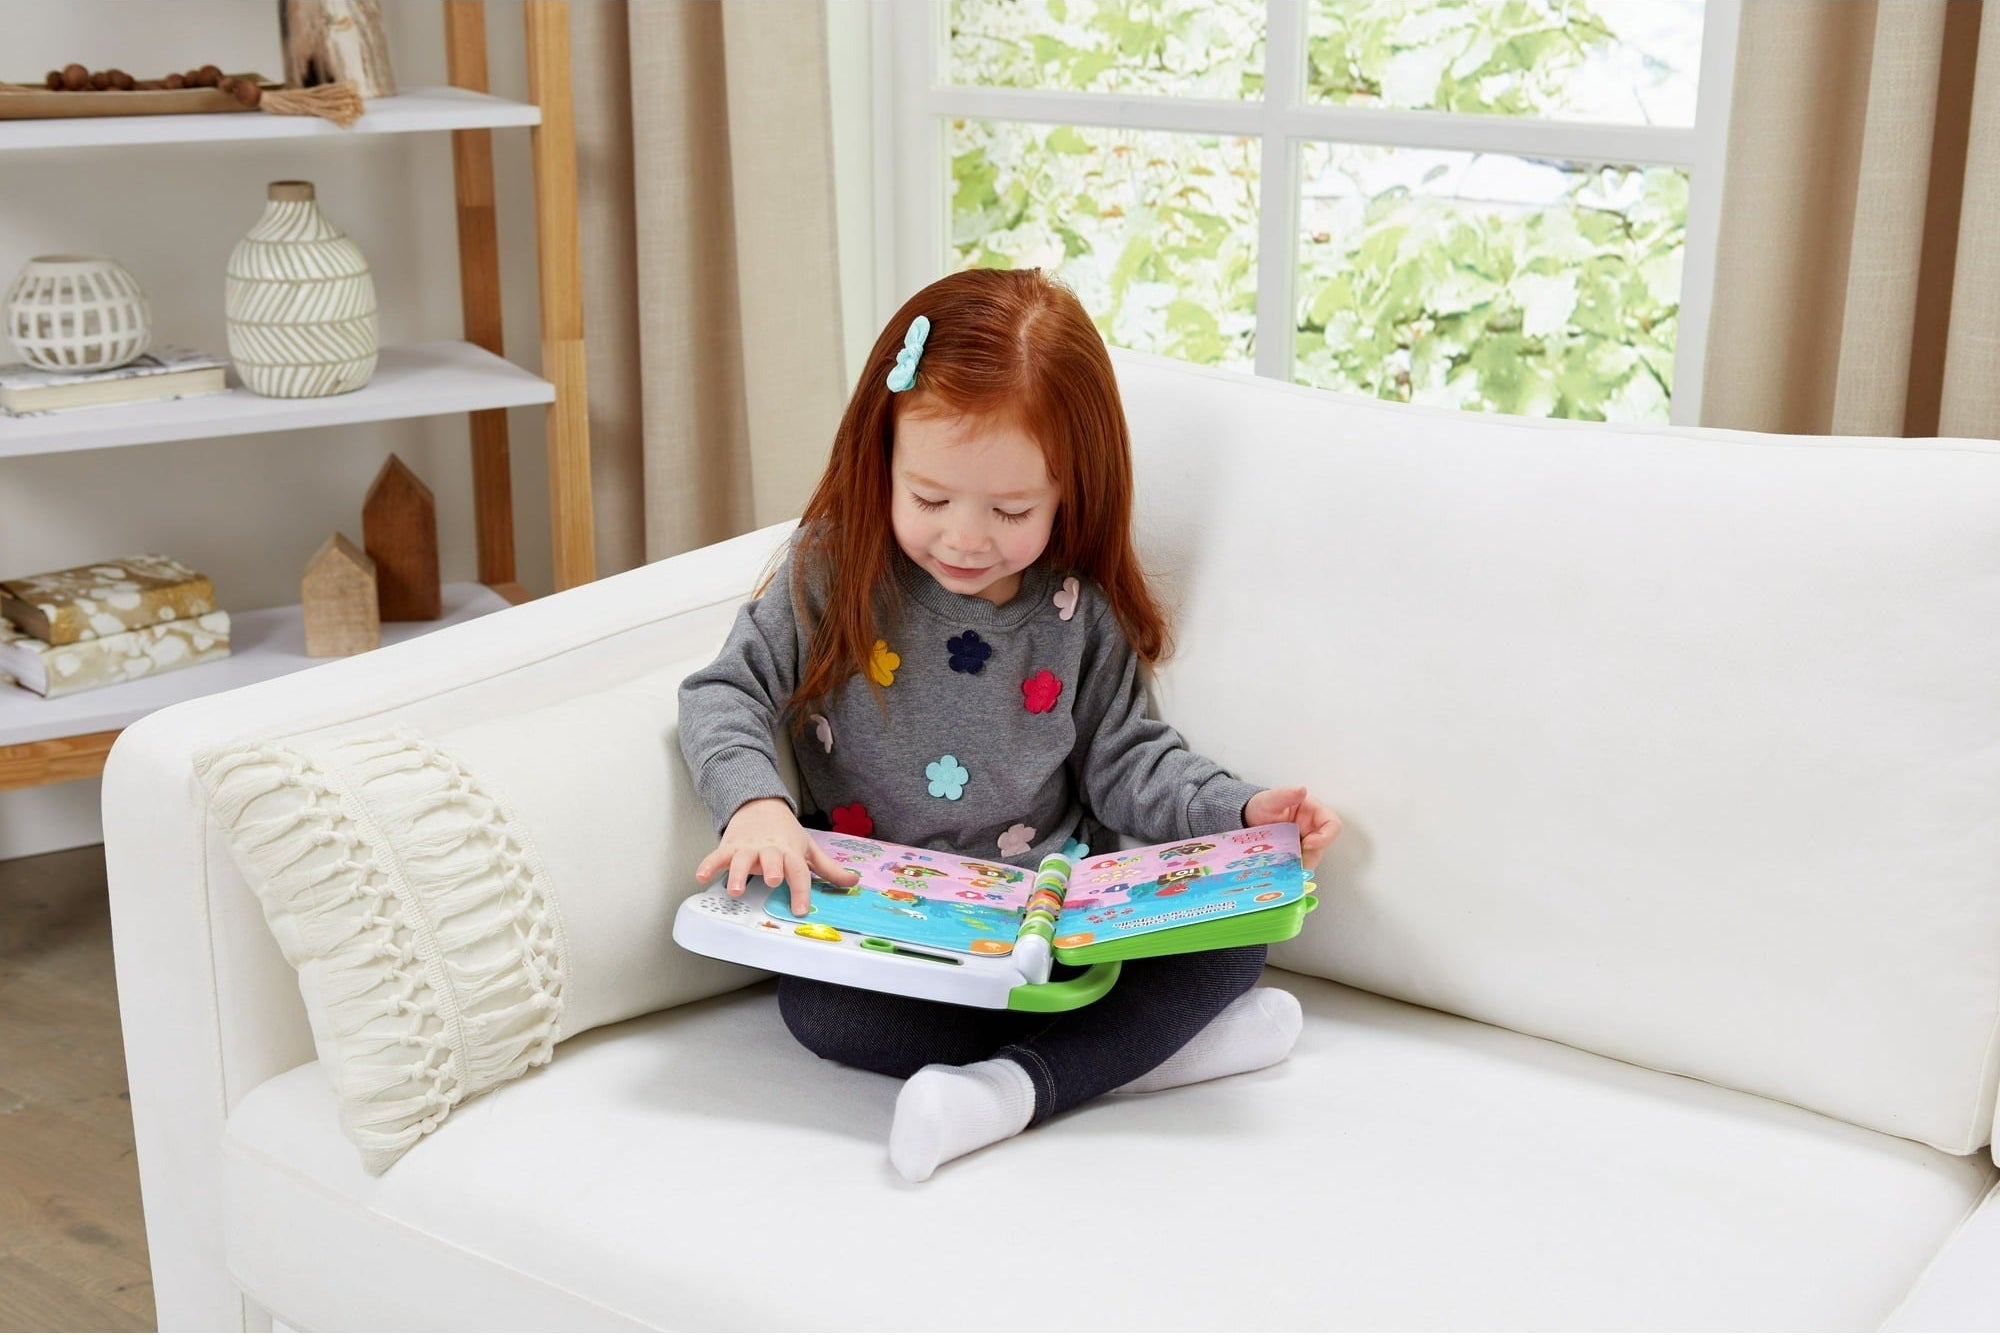 A little girl sitting on the couch playing with her activity book.